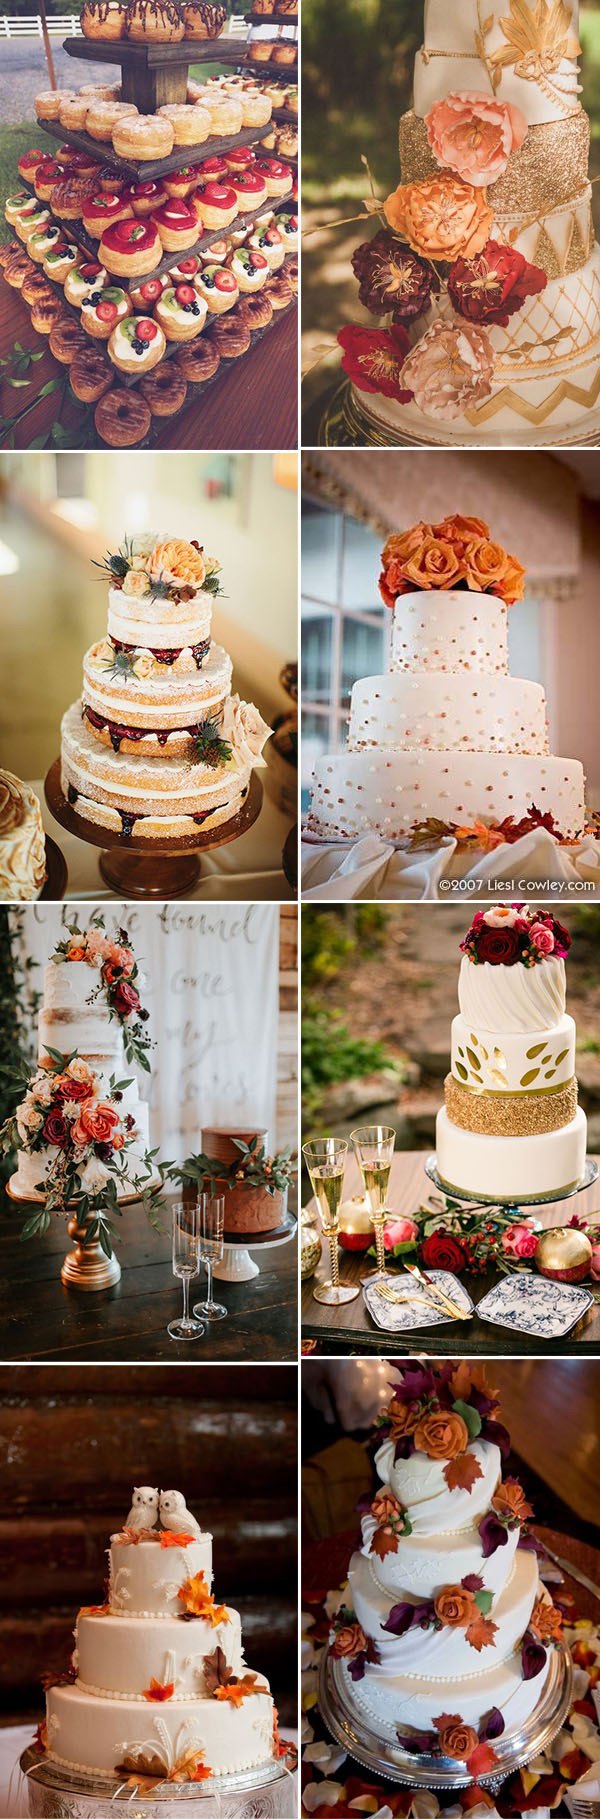 Fall Color Wedding Cakes
 50 Genius Fall Wedding Ideas You’ll Love To Try